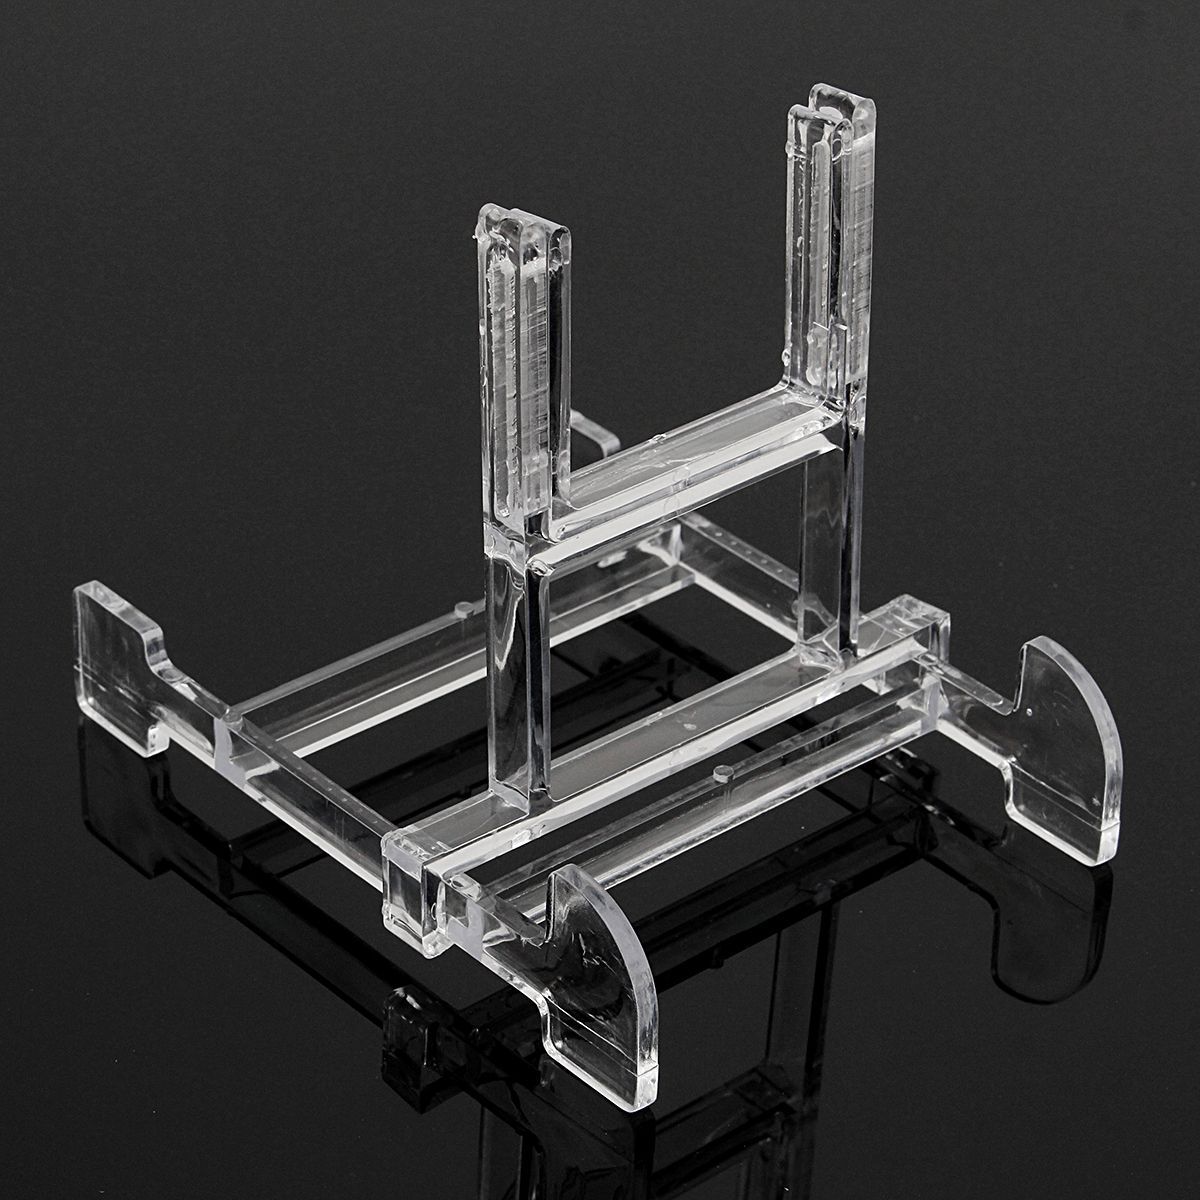 Clear-Adjustable-3quot-5quot-Easel-Jewelry-Display-Stand-Plate-Bowl-Photo-Frame-Book-Artwor-1461085